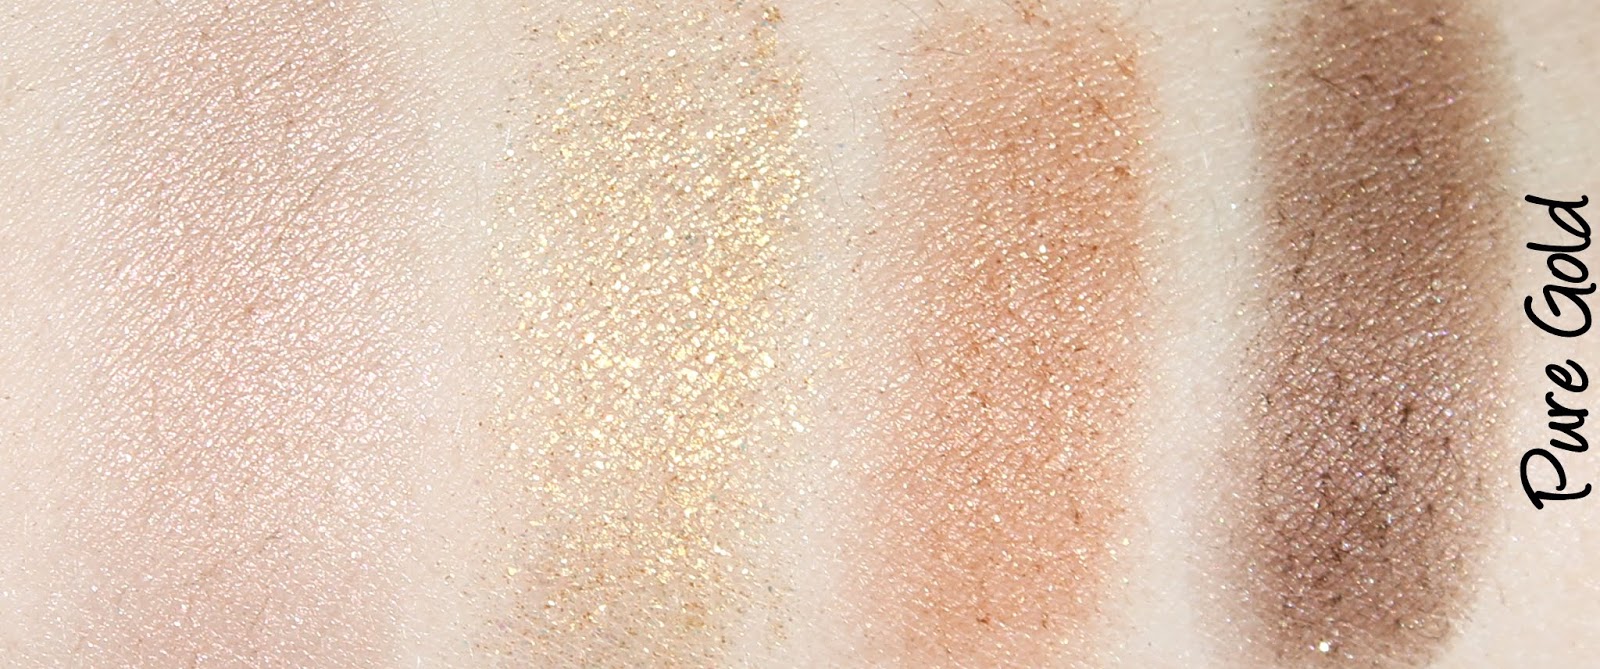 ZA Impact-Full Eyes Groovy Limited Edition Pure Gold Eyeshadow Palette Swatches & Review